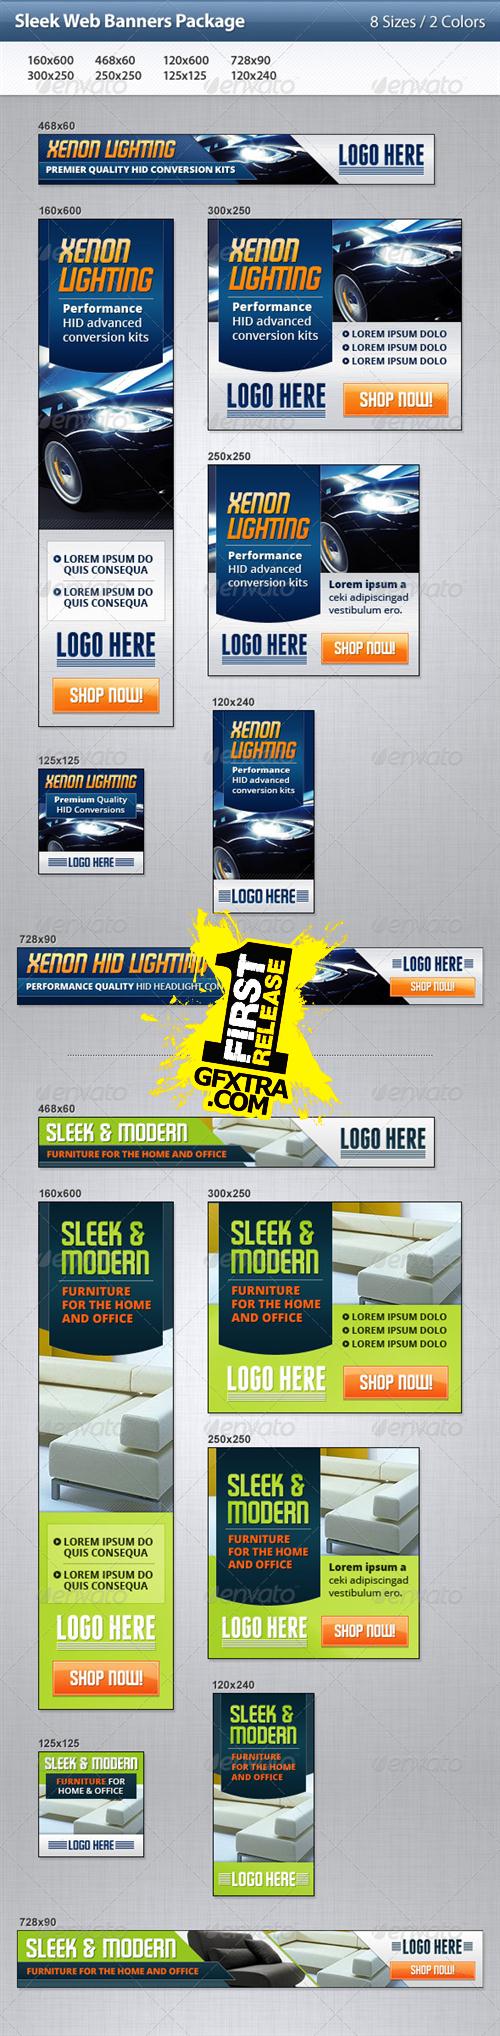 GraphicRiver - Sleek Web Banners Package